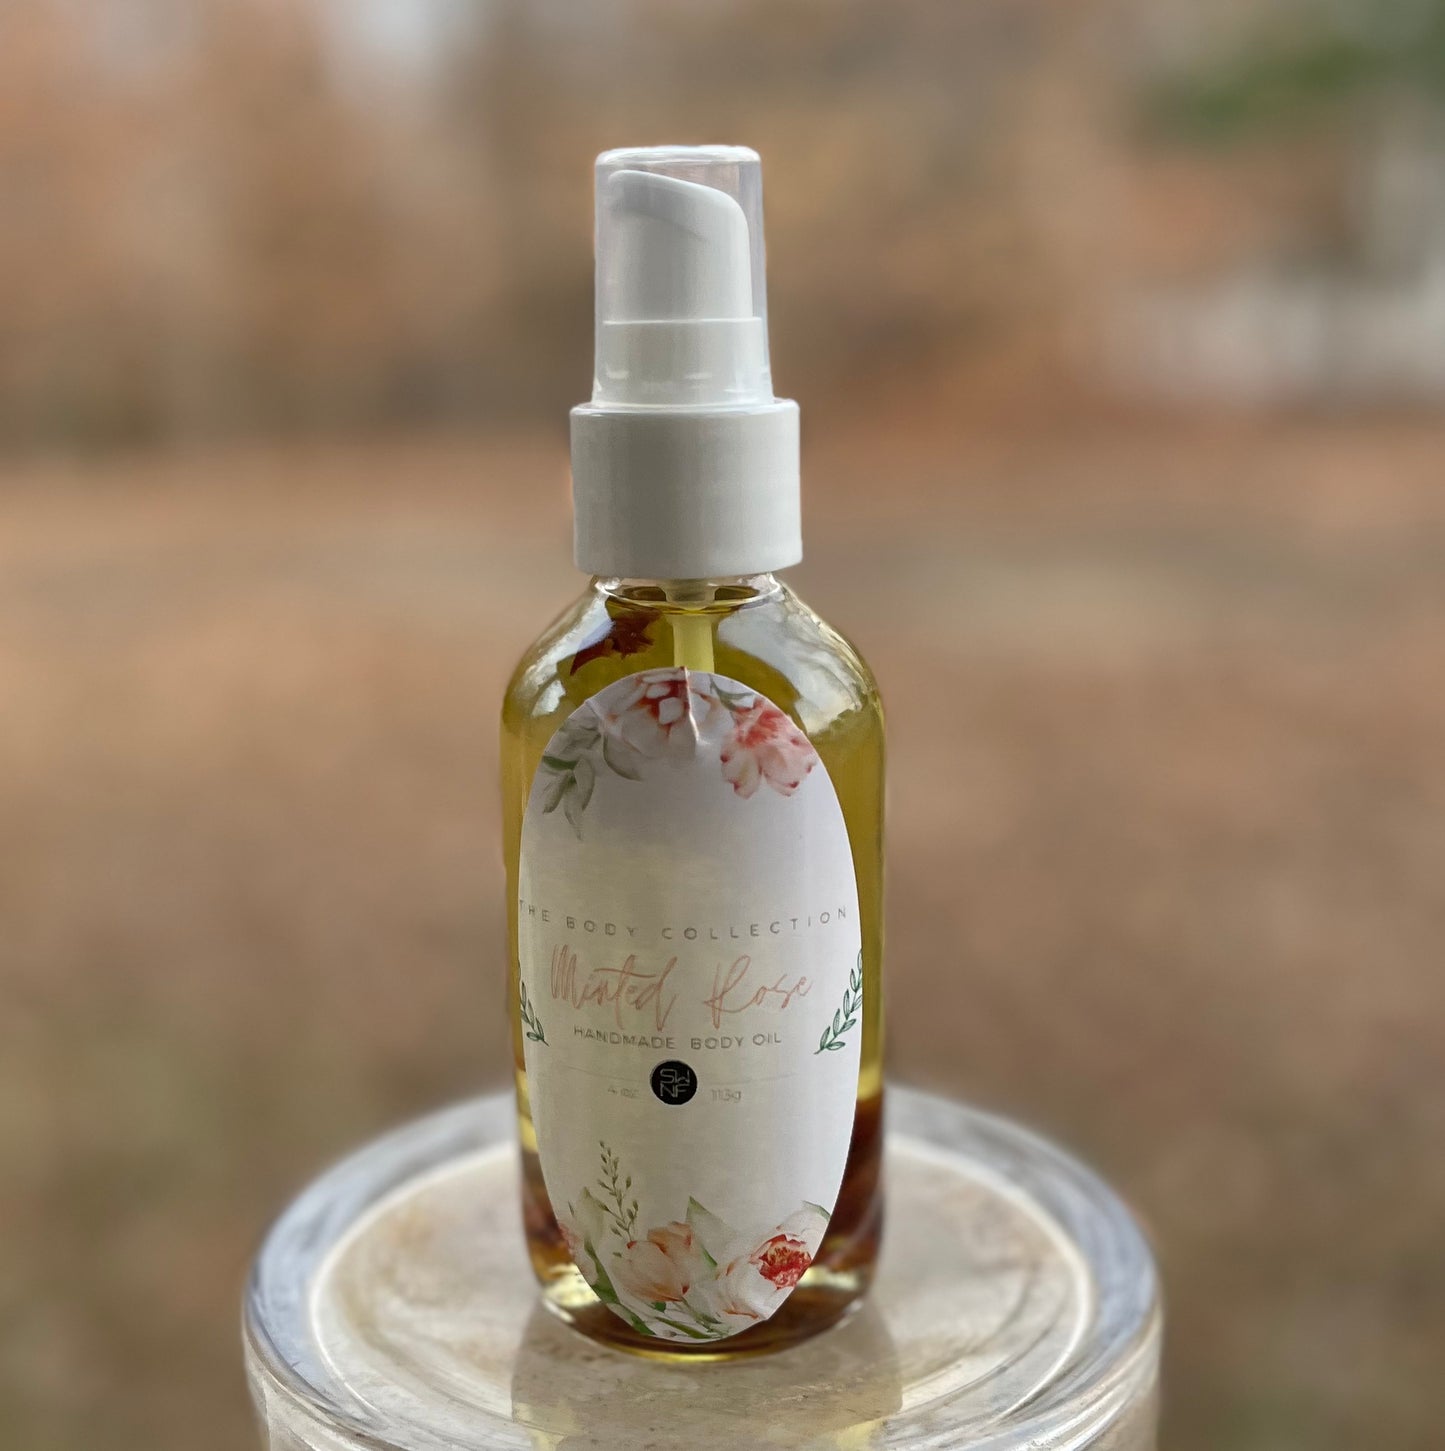 Minted Rose Body Oil- She will not fail